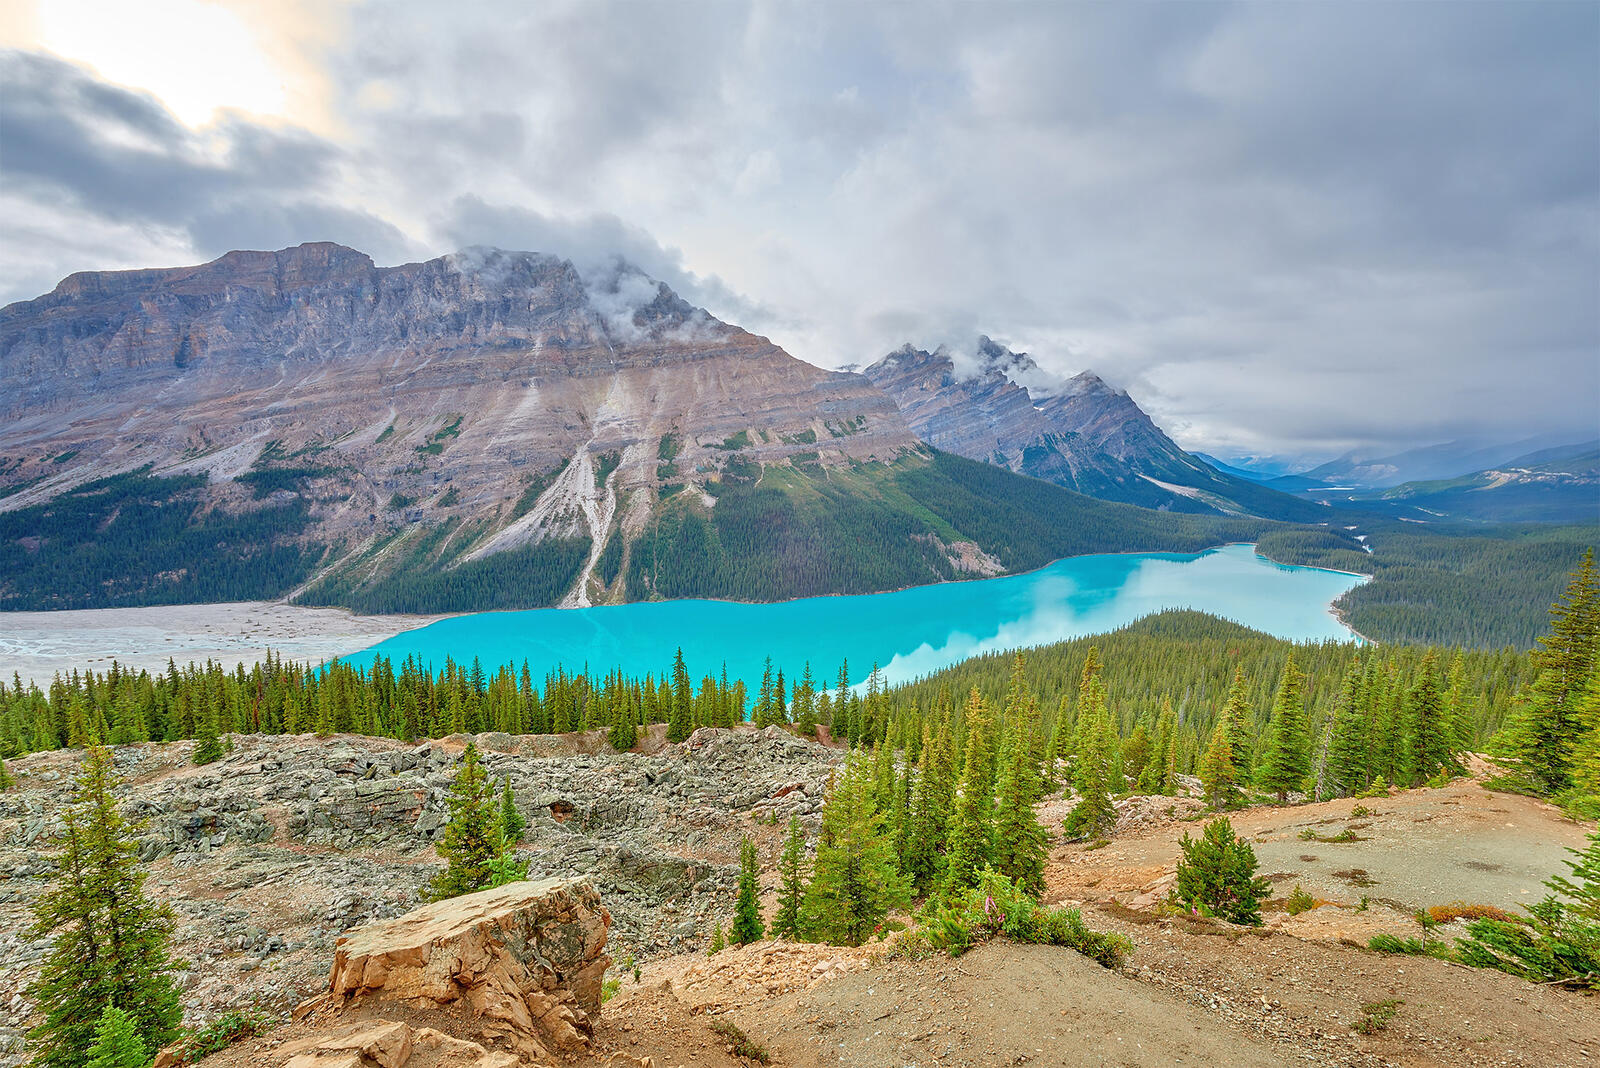 Wallpapers Peyto Lake Canada Banff National Park in the Canadian Rockies on the desktop